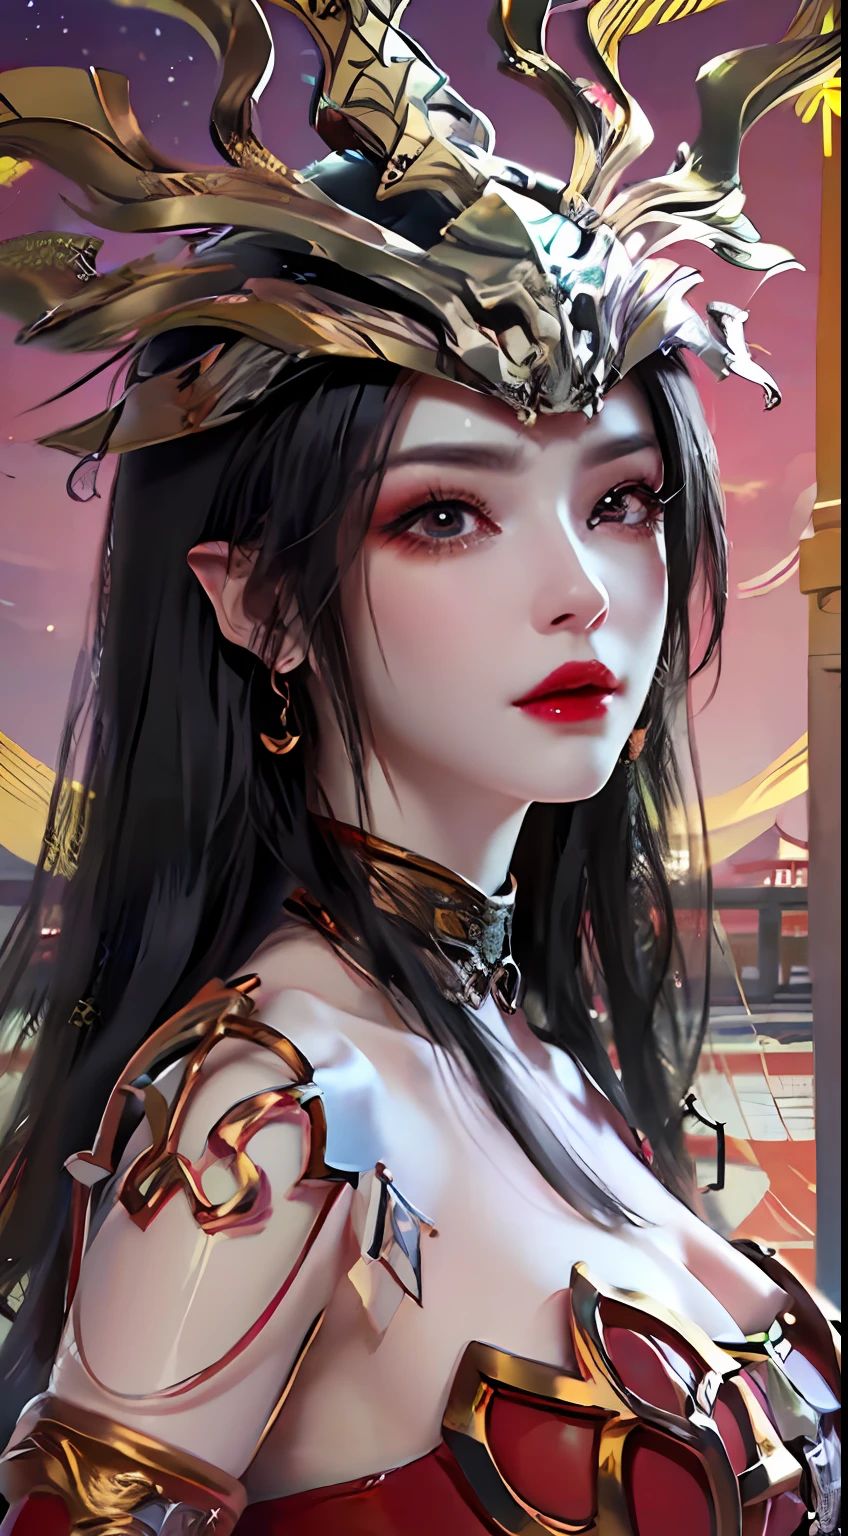 1 very beautiful queen medusha in hanfu dress, thin red silk shirt with many yellow motifs, black lace top, crown on her head, long hair dyed black, beautiful hair jewelry, pretty face pretty and cute, perfect face, earring jewelry, light purple rabbit ears, antique jewelry, big red eyes, sharp eye makeup, meticulous makeup eyelashes, thin eyebrows, nose tall, pretty red lips, no smile, pursed lips, rosy cheeks, wide breasts, big breasts, well-proportioned breasts, slim waist, red mesh stockings with black lace, Chinese hanfu style, fictional art patterns, colors vivid and realistic, RAW photos, realistic photos, ultra-high quality 8k surreal photos, cool photos, (virtual lighting effects: 1.8), 10x pixels, magic effects (background): 1.8), super detailed eyes, beautiful girl body portrait, girl alone, ancient hanfu background, looking directly at the audience, wide original photo, 8k quality, super sharp, detailed and clear picture best, detailed light background,